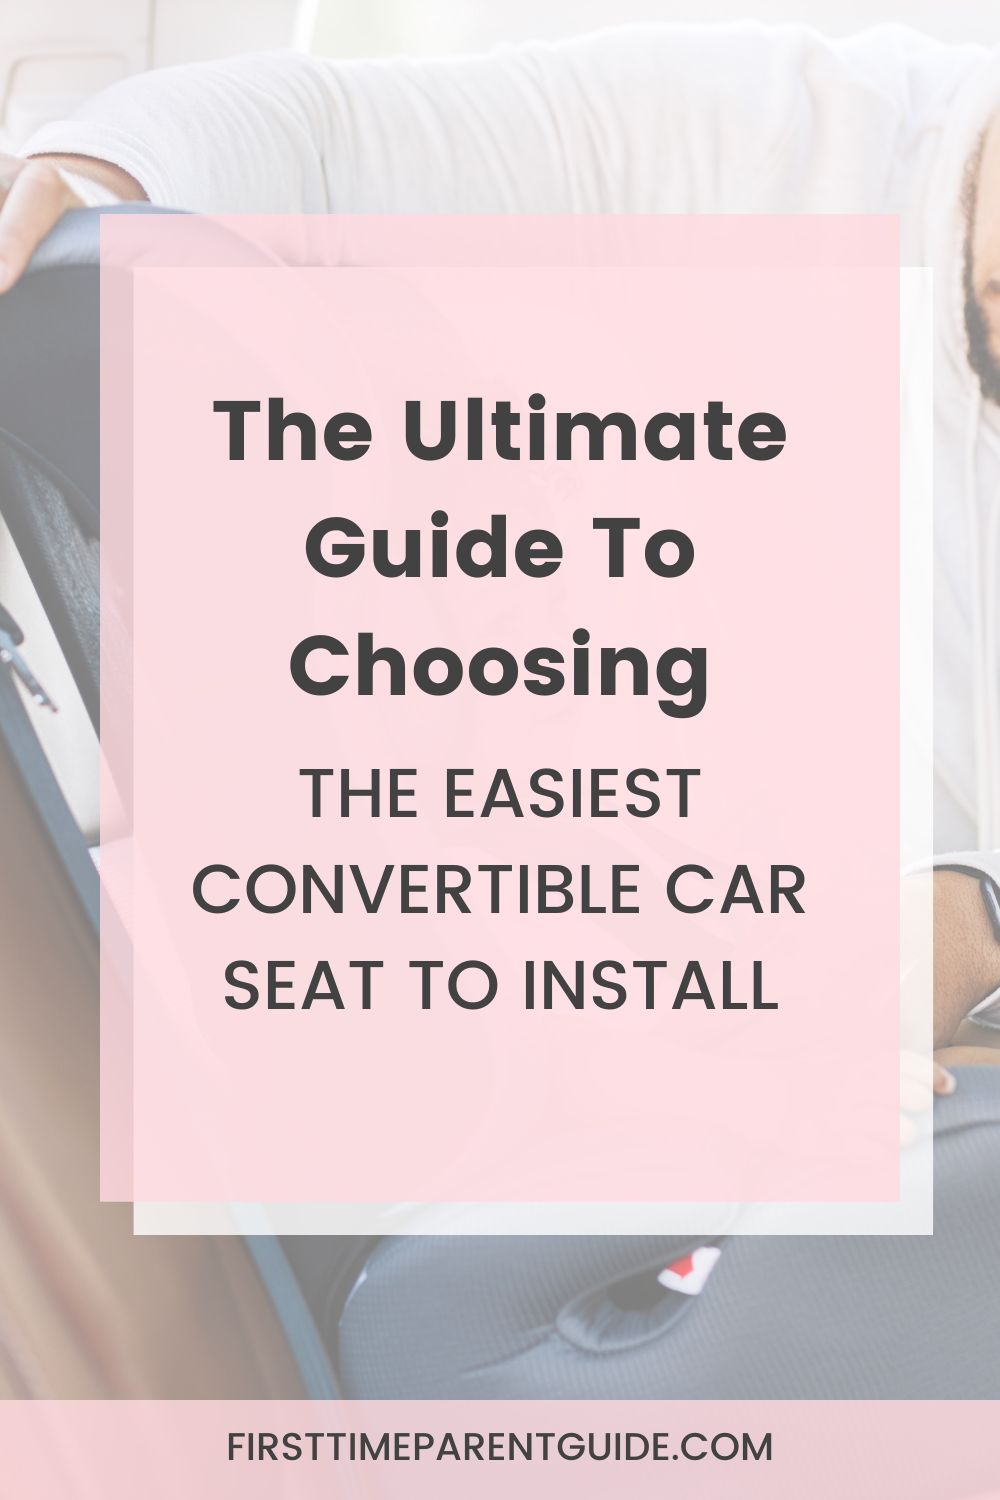 The Easiest Convertible Car Seat To Install